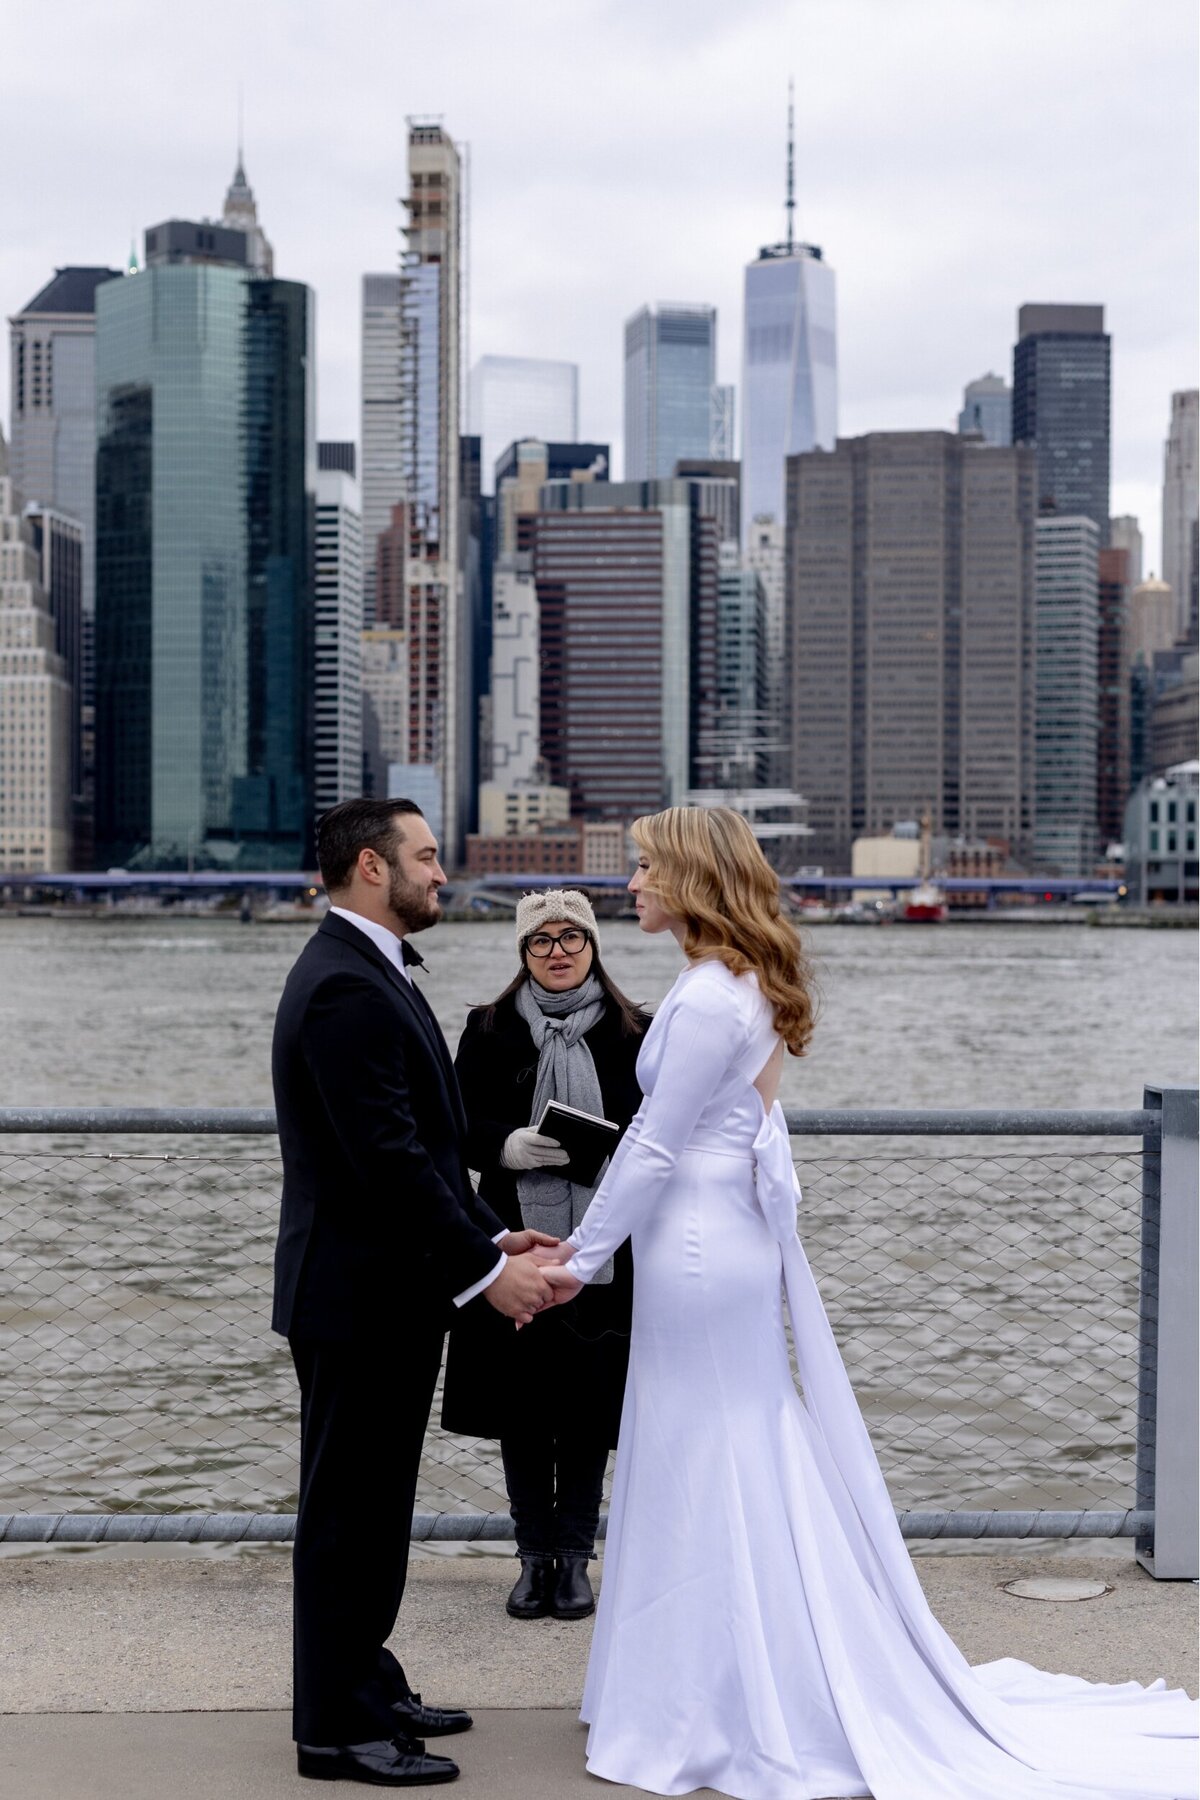 Bride and groom saying 'I DO' in front of river in NYC.